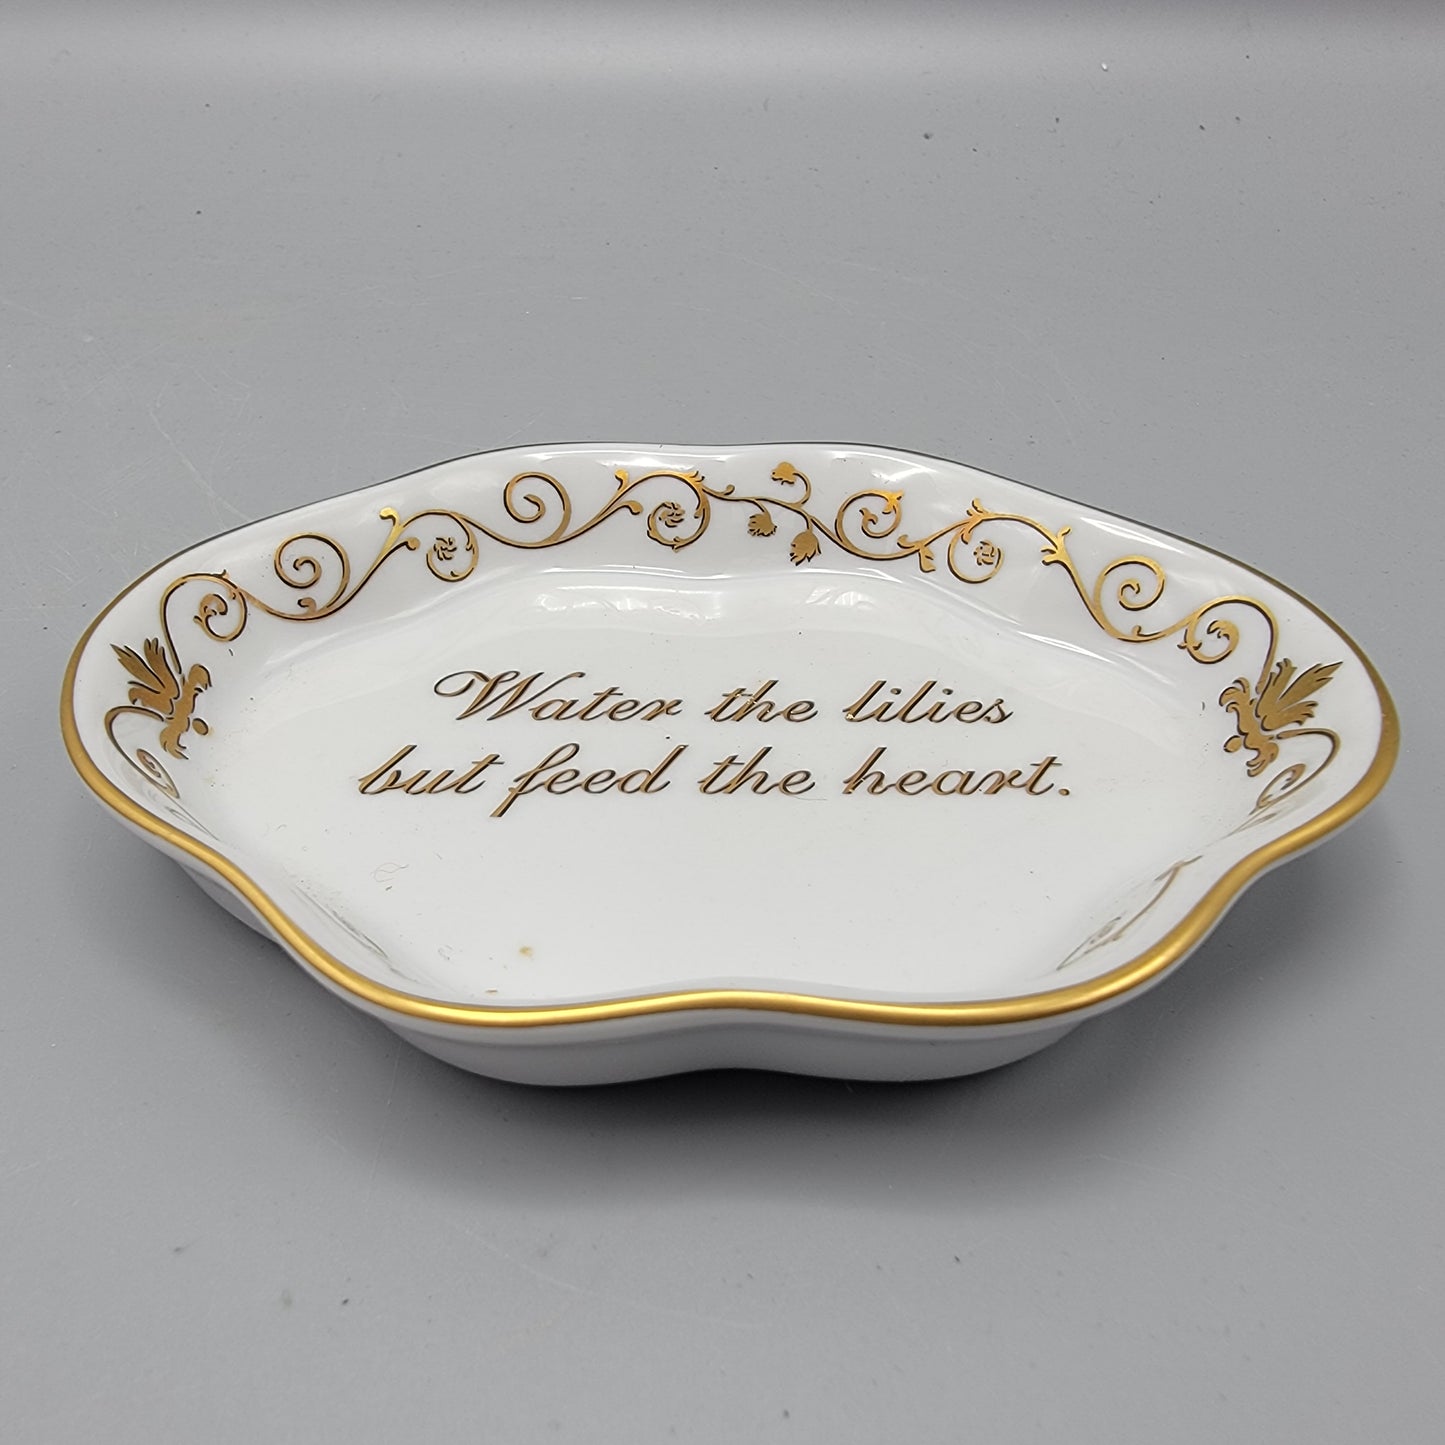 Mottahedeh Porcelain "Water the Lilies But Feed the Heart" Porcelain Dish